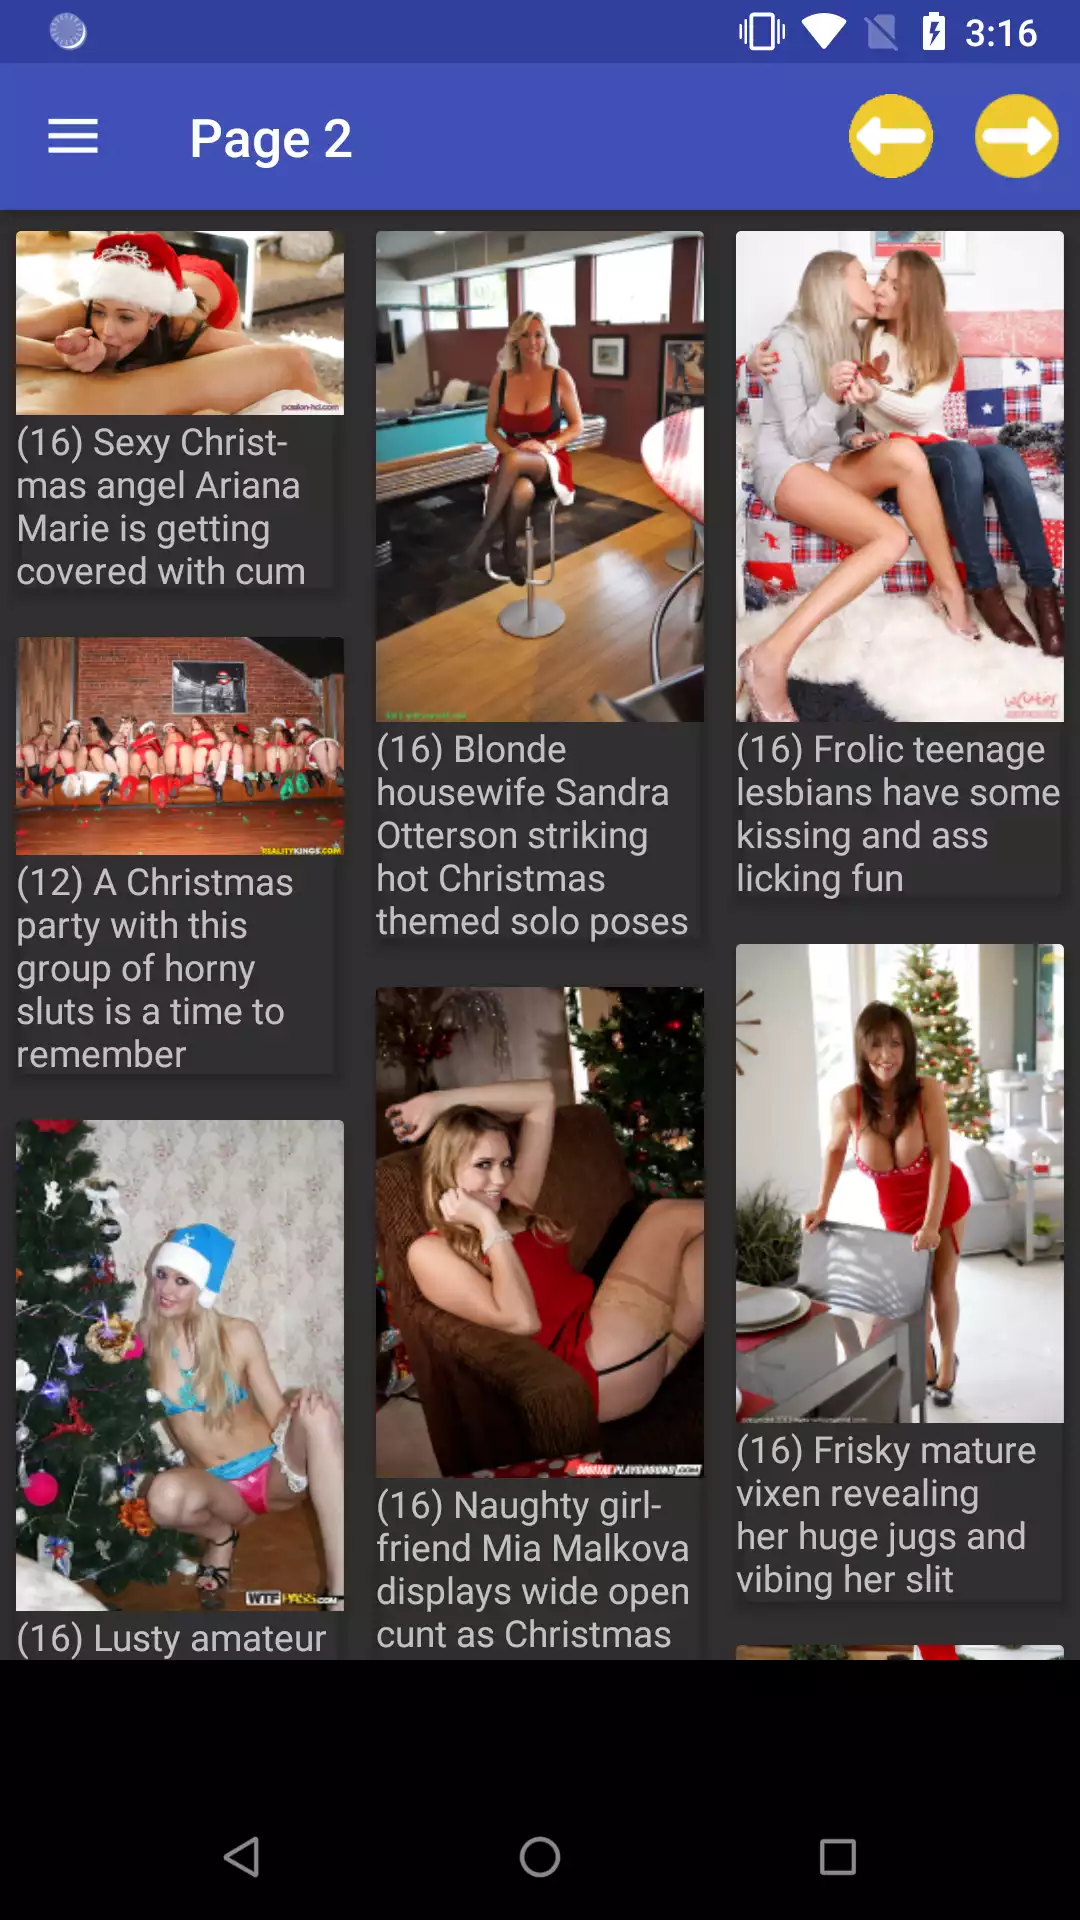 Christmas Porn galleries apps,pics,ster,ebony,galleries,photo,andriod,download,amateur,anime,app,hentai,christmas,porn,wallpapers,adult,sexy,henti,pornstars,sex,hot,pictures,collections